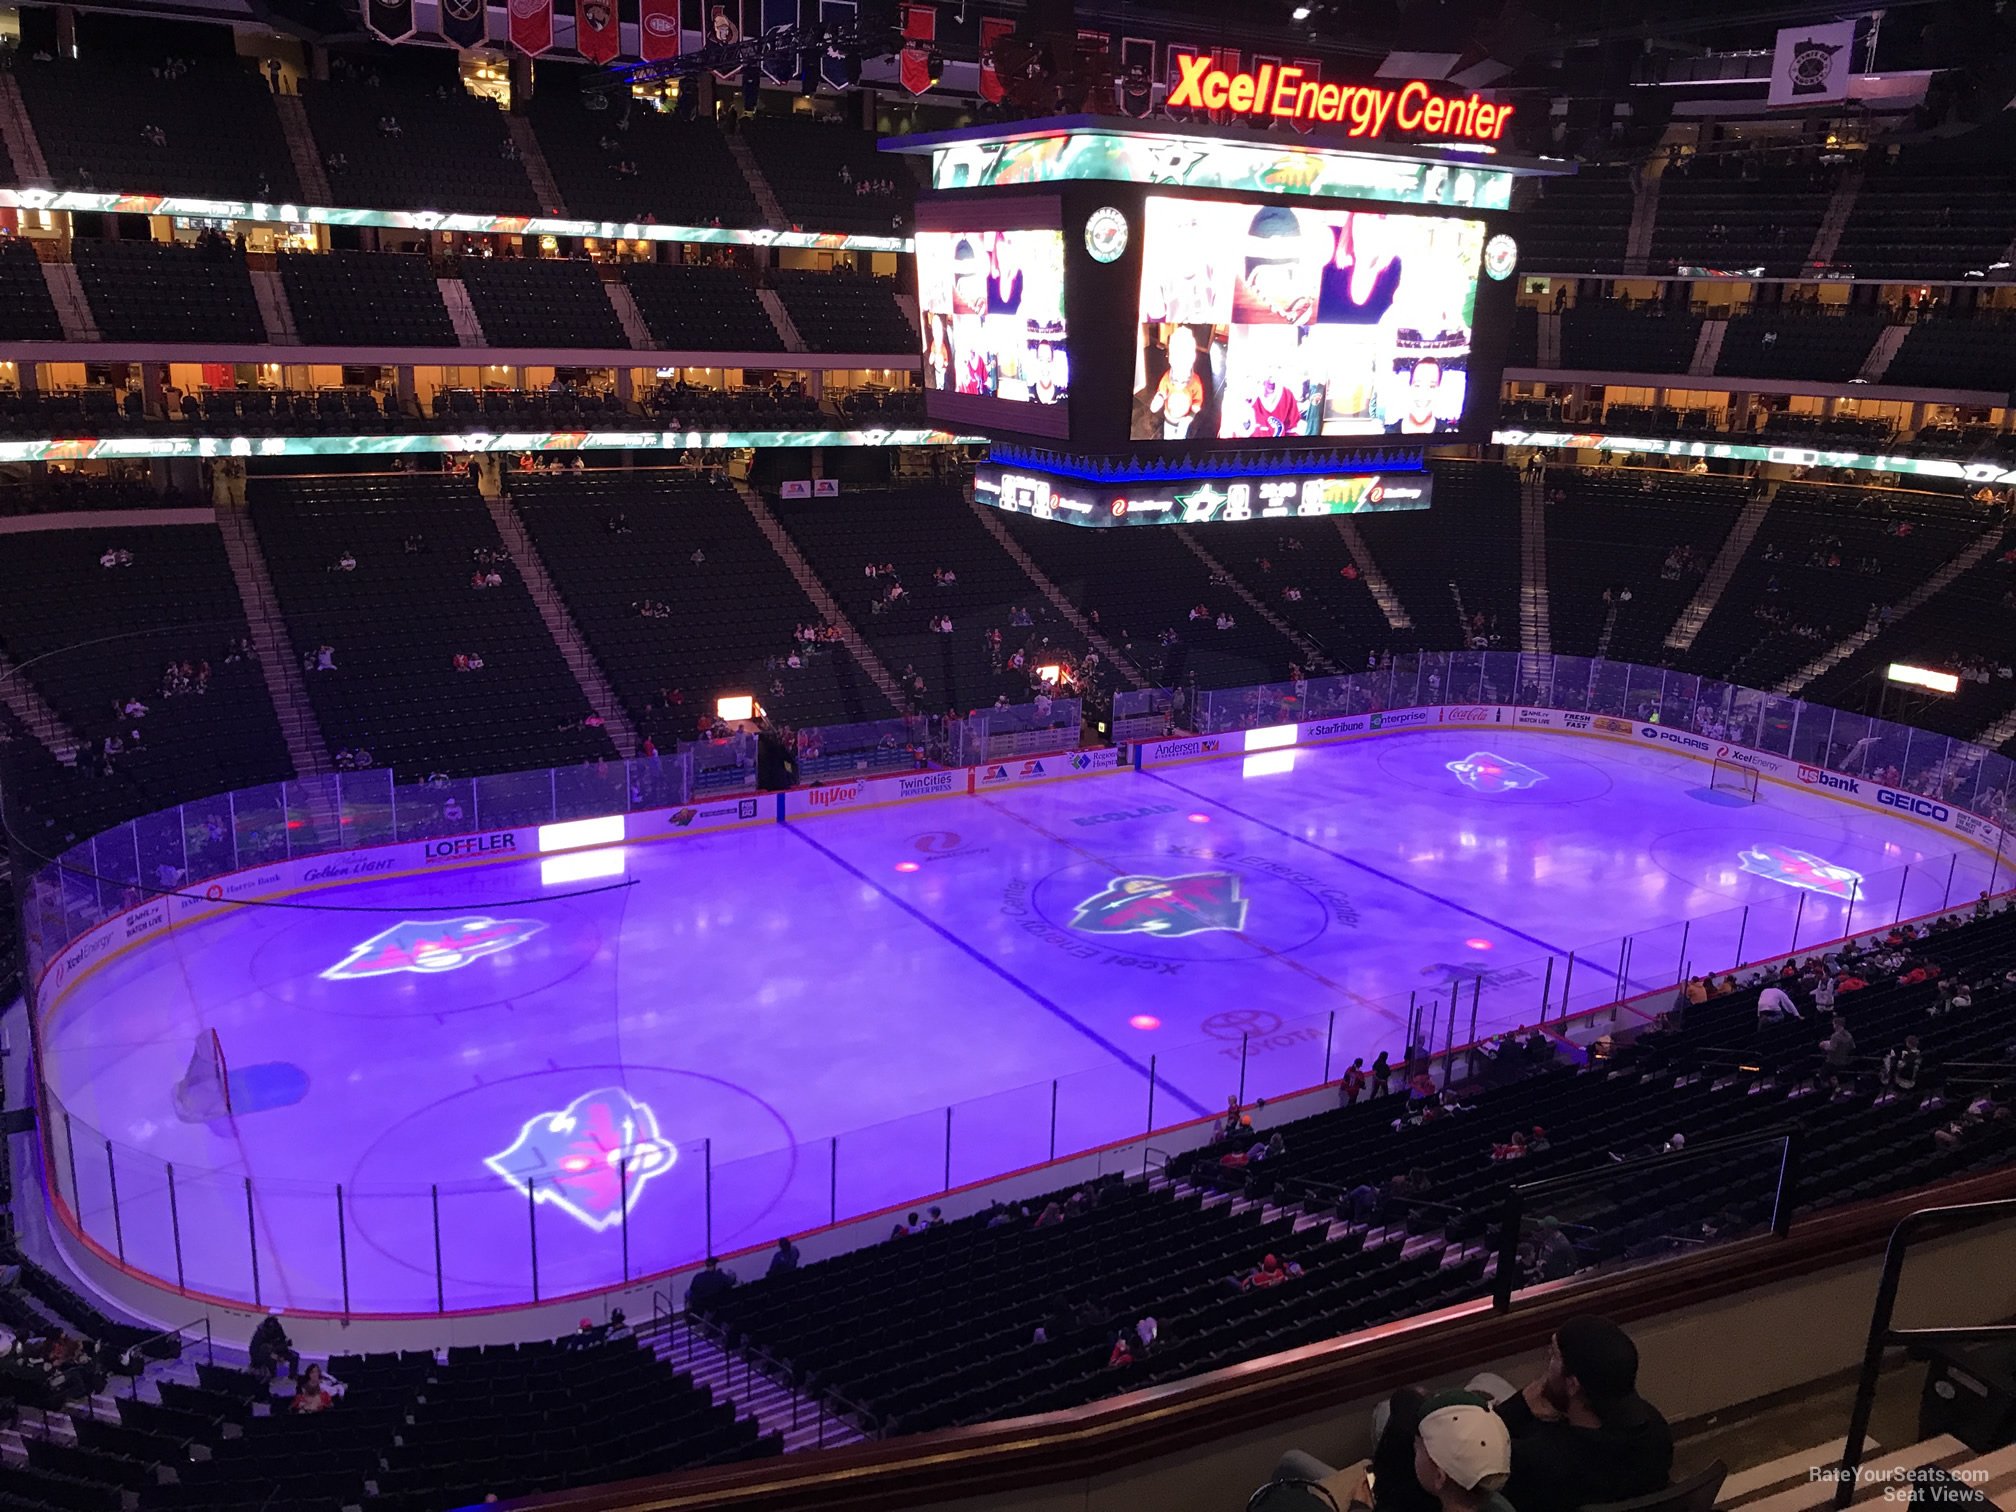 section c10, row 5 seat view  for hockey - xcel energy center